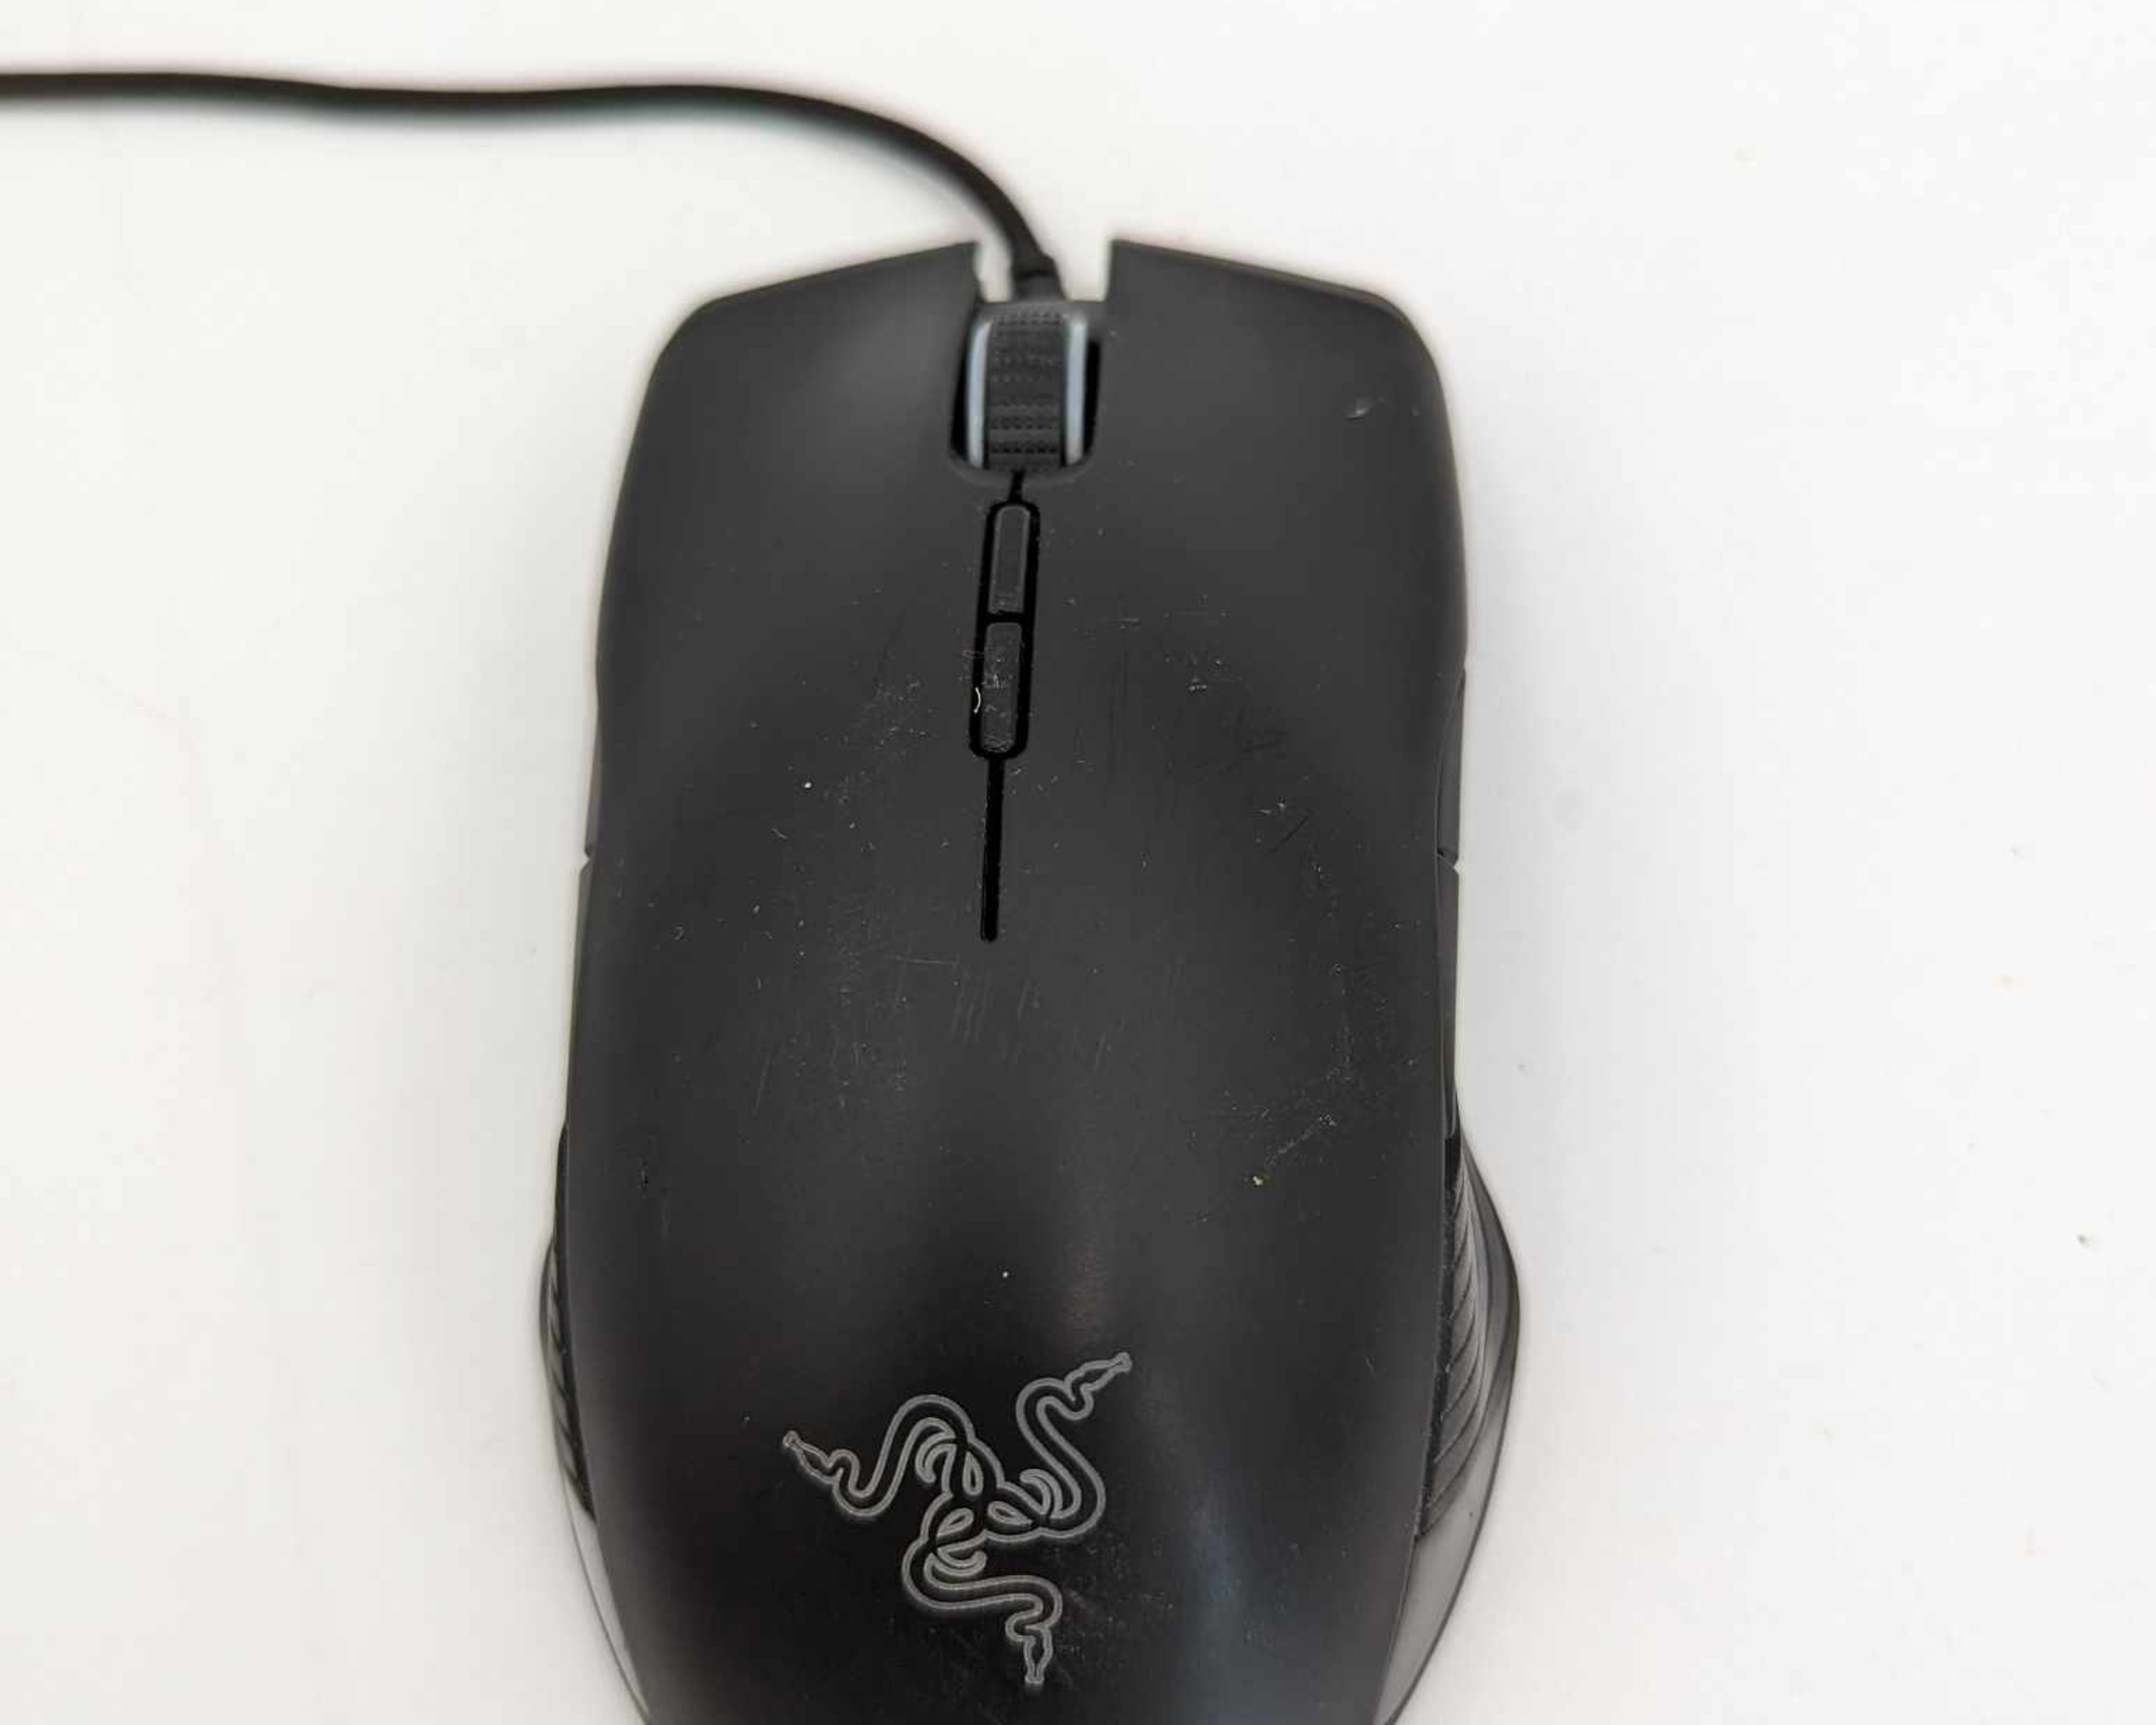 Razer Lancehead wired gaming mouse